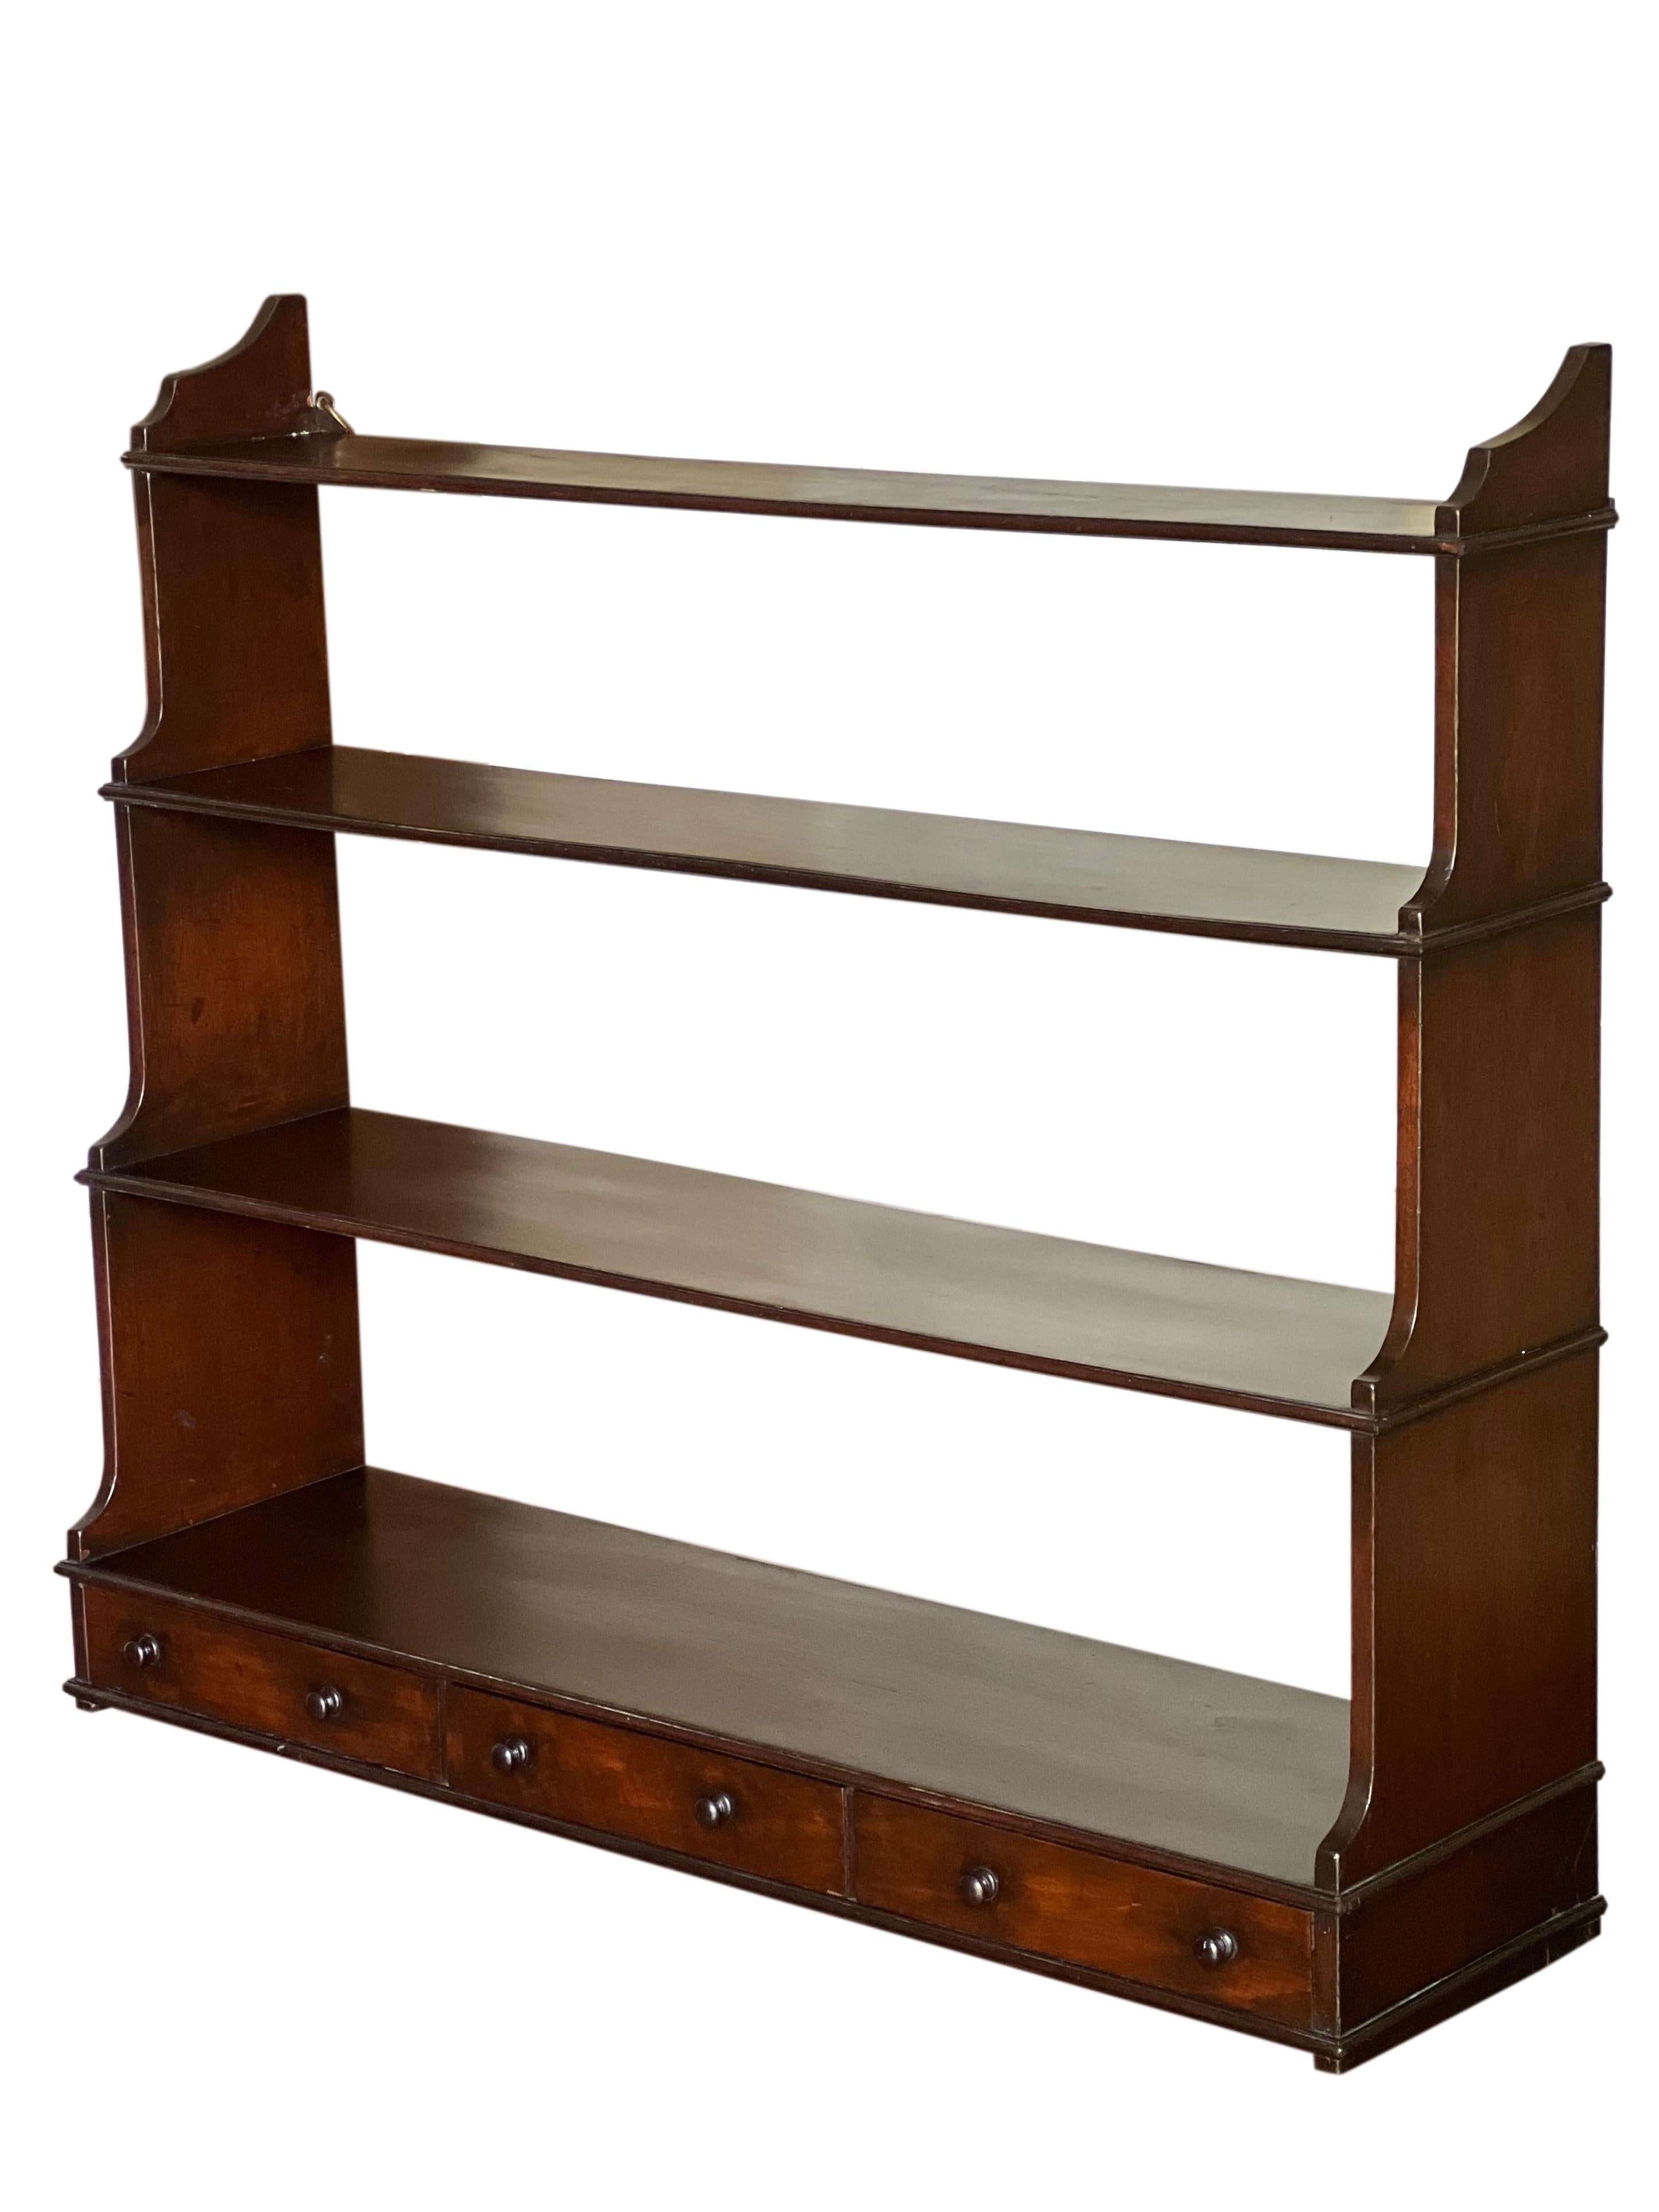 19th Century English Walnut and Mahogany Hanging Wall Shelves with Drawers